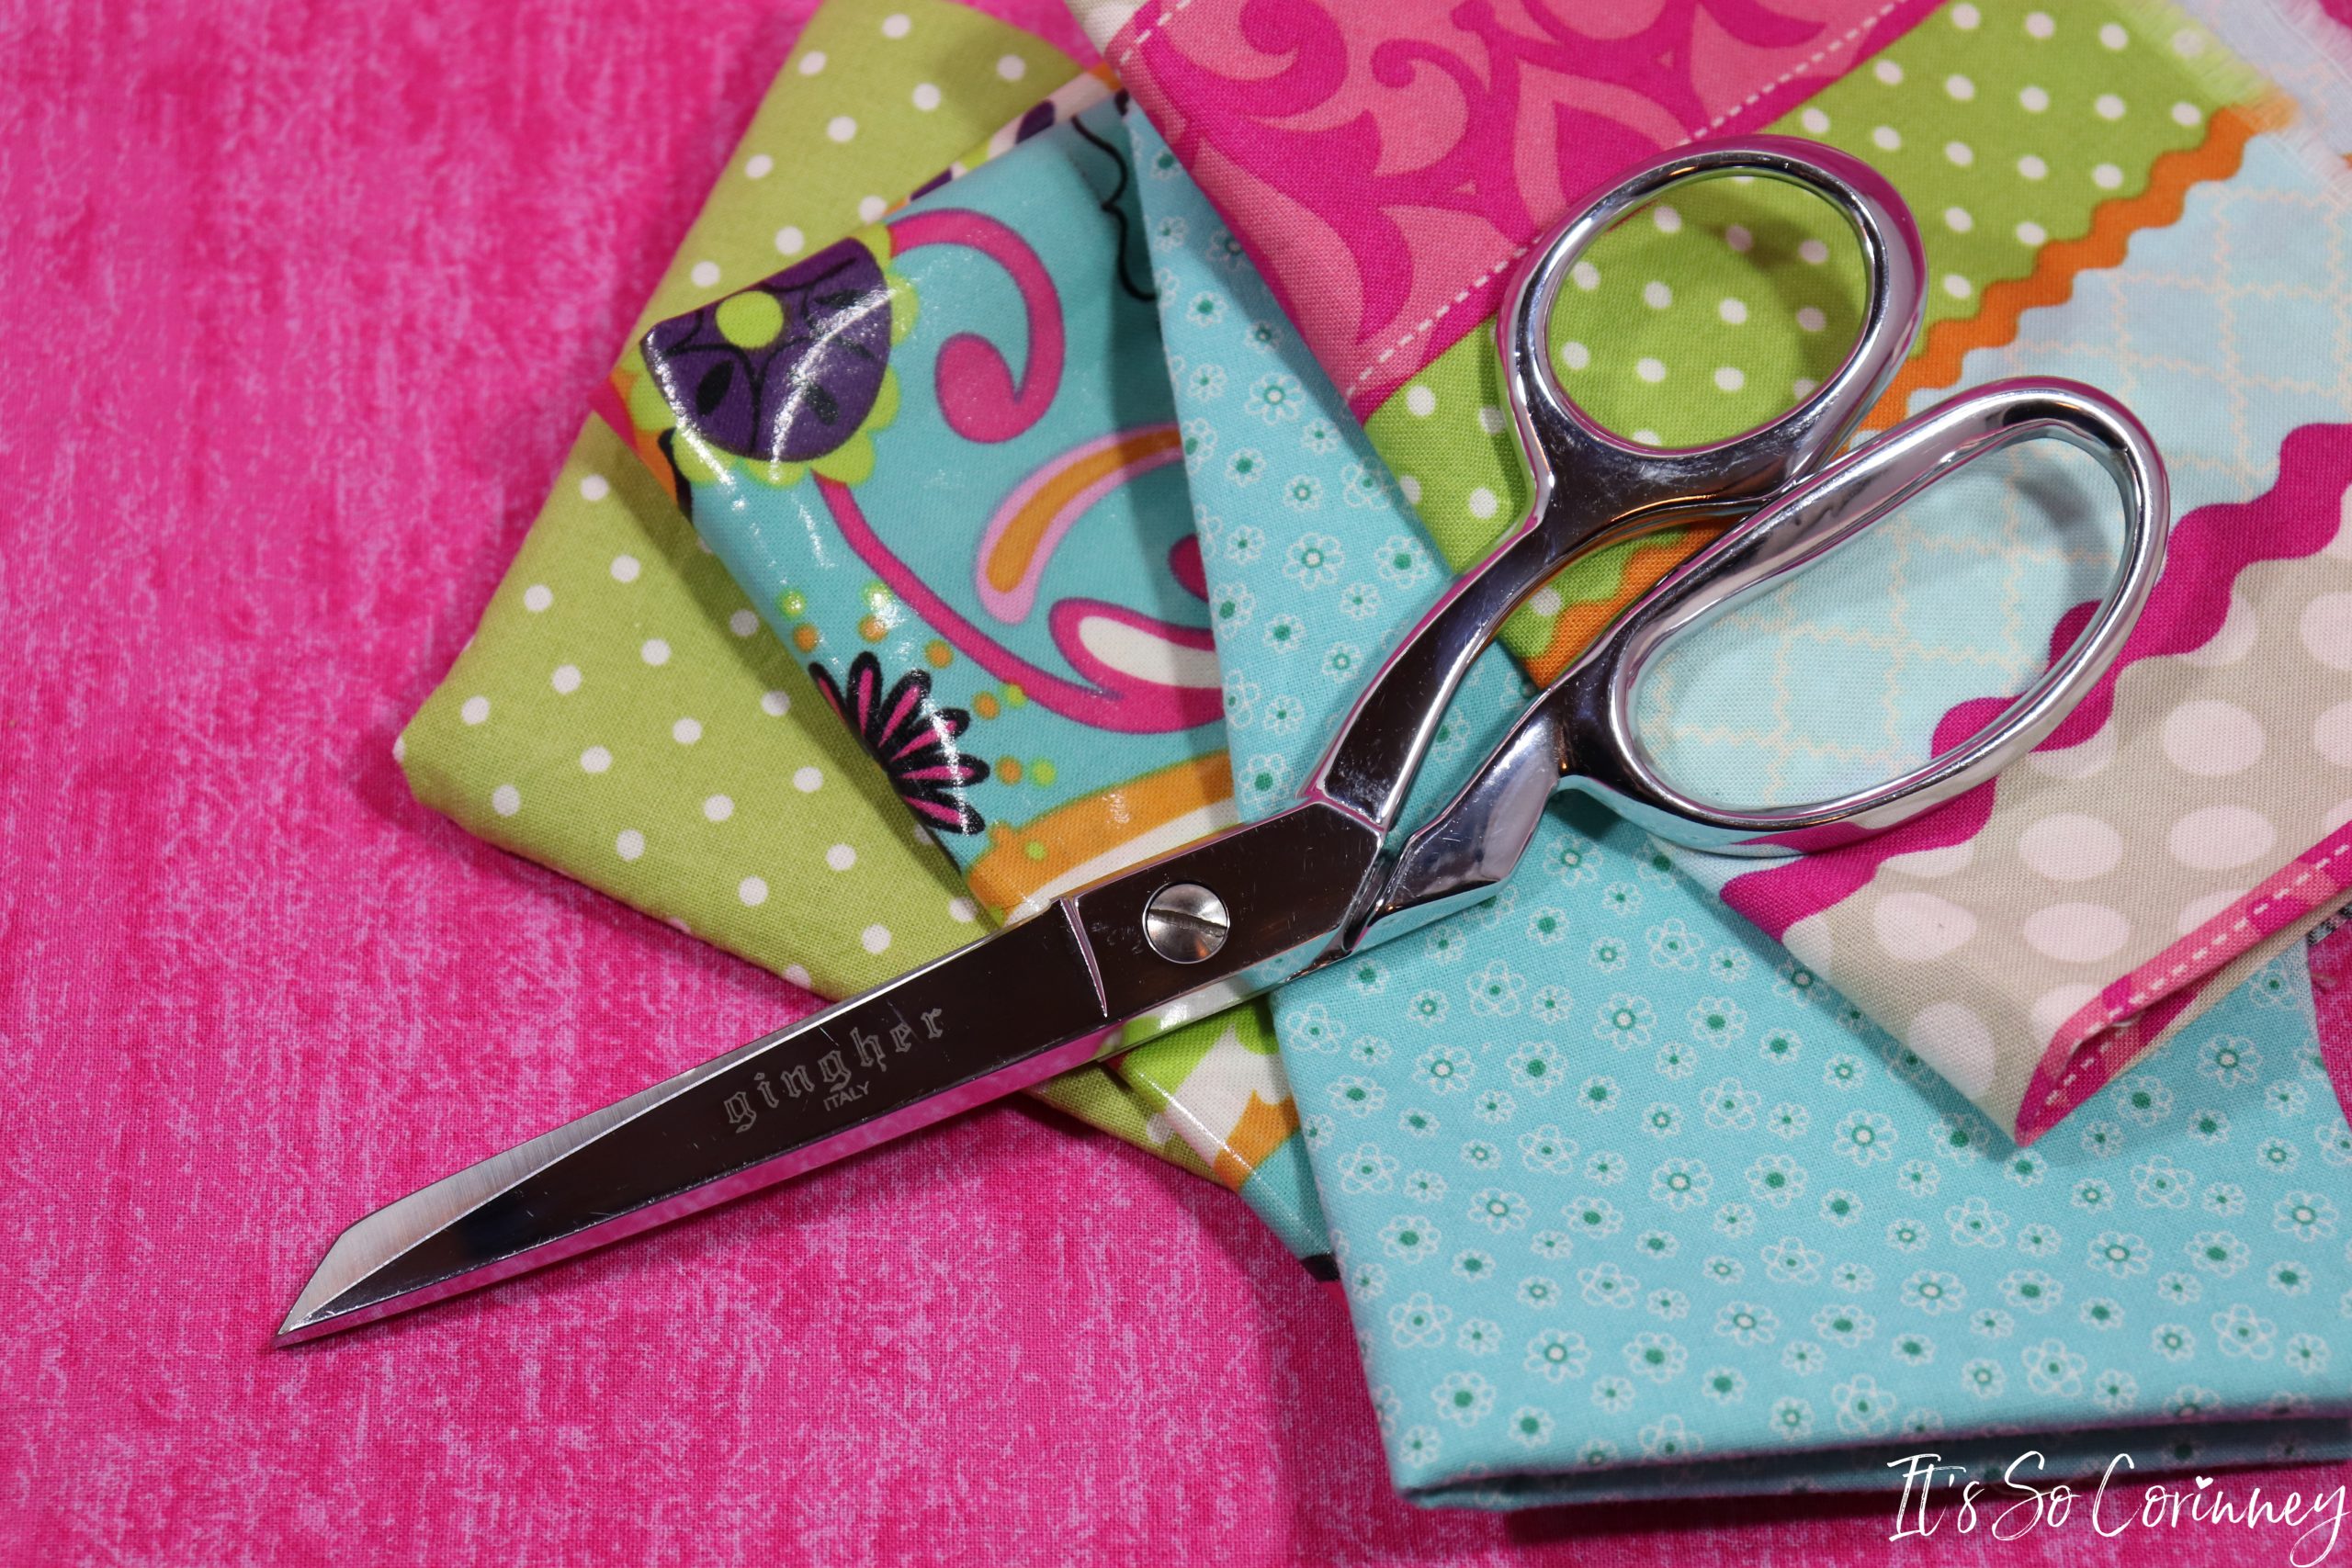 Are Gingher Sewing Scissors Worth The Investment?